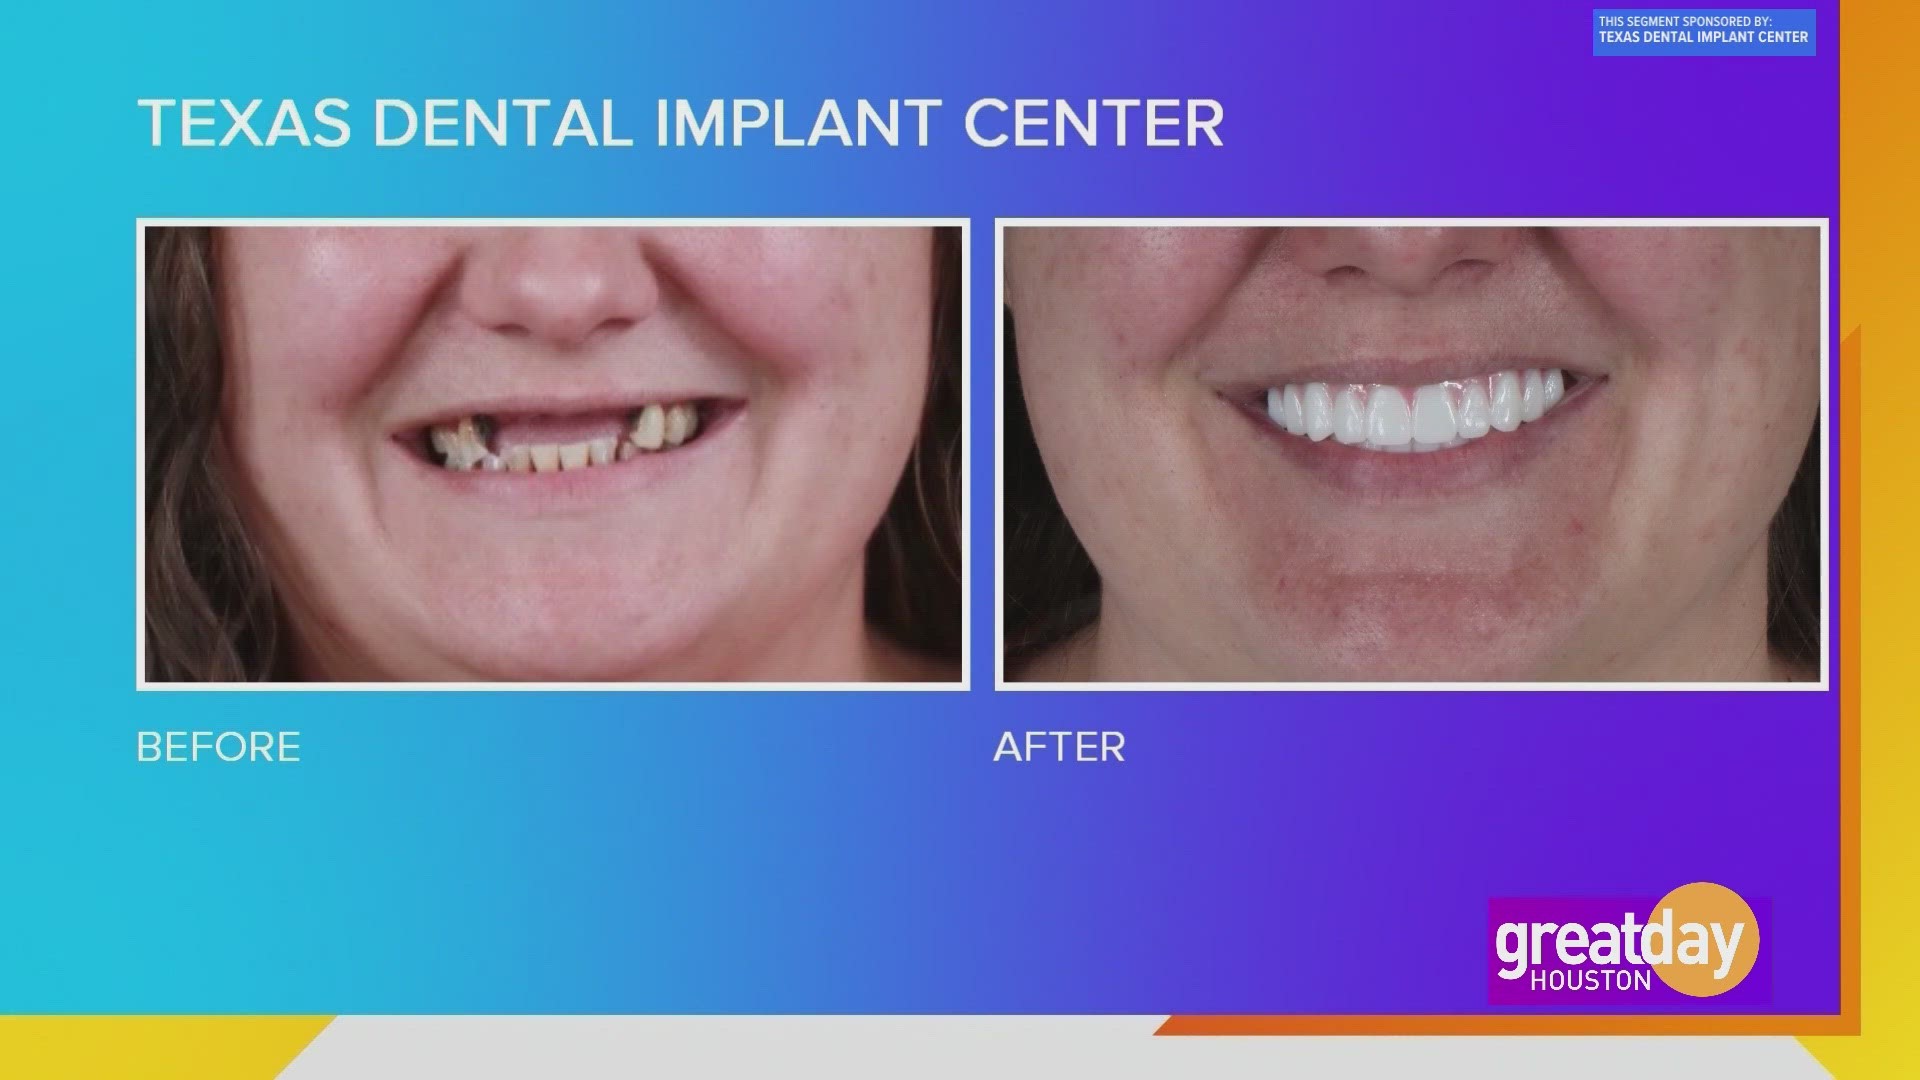 The Texas Dental Implant Center can help you transform your smile so you can say goodbye to missing and failing teeth.